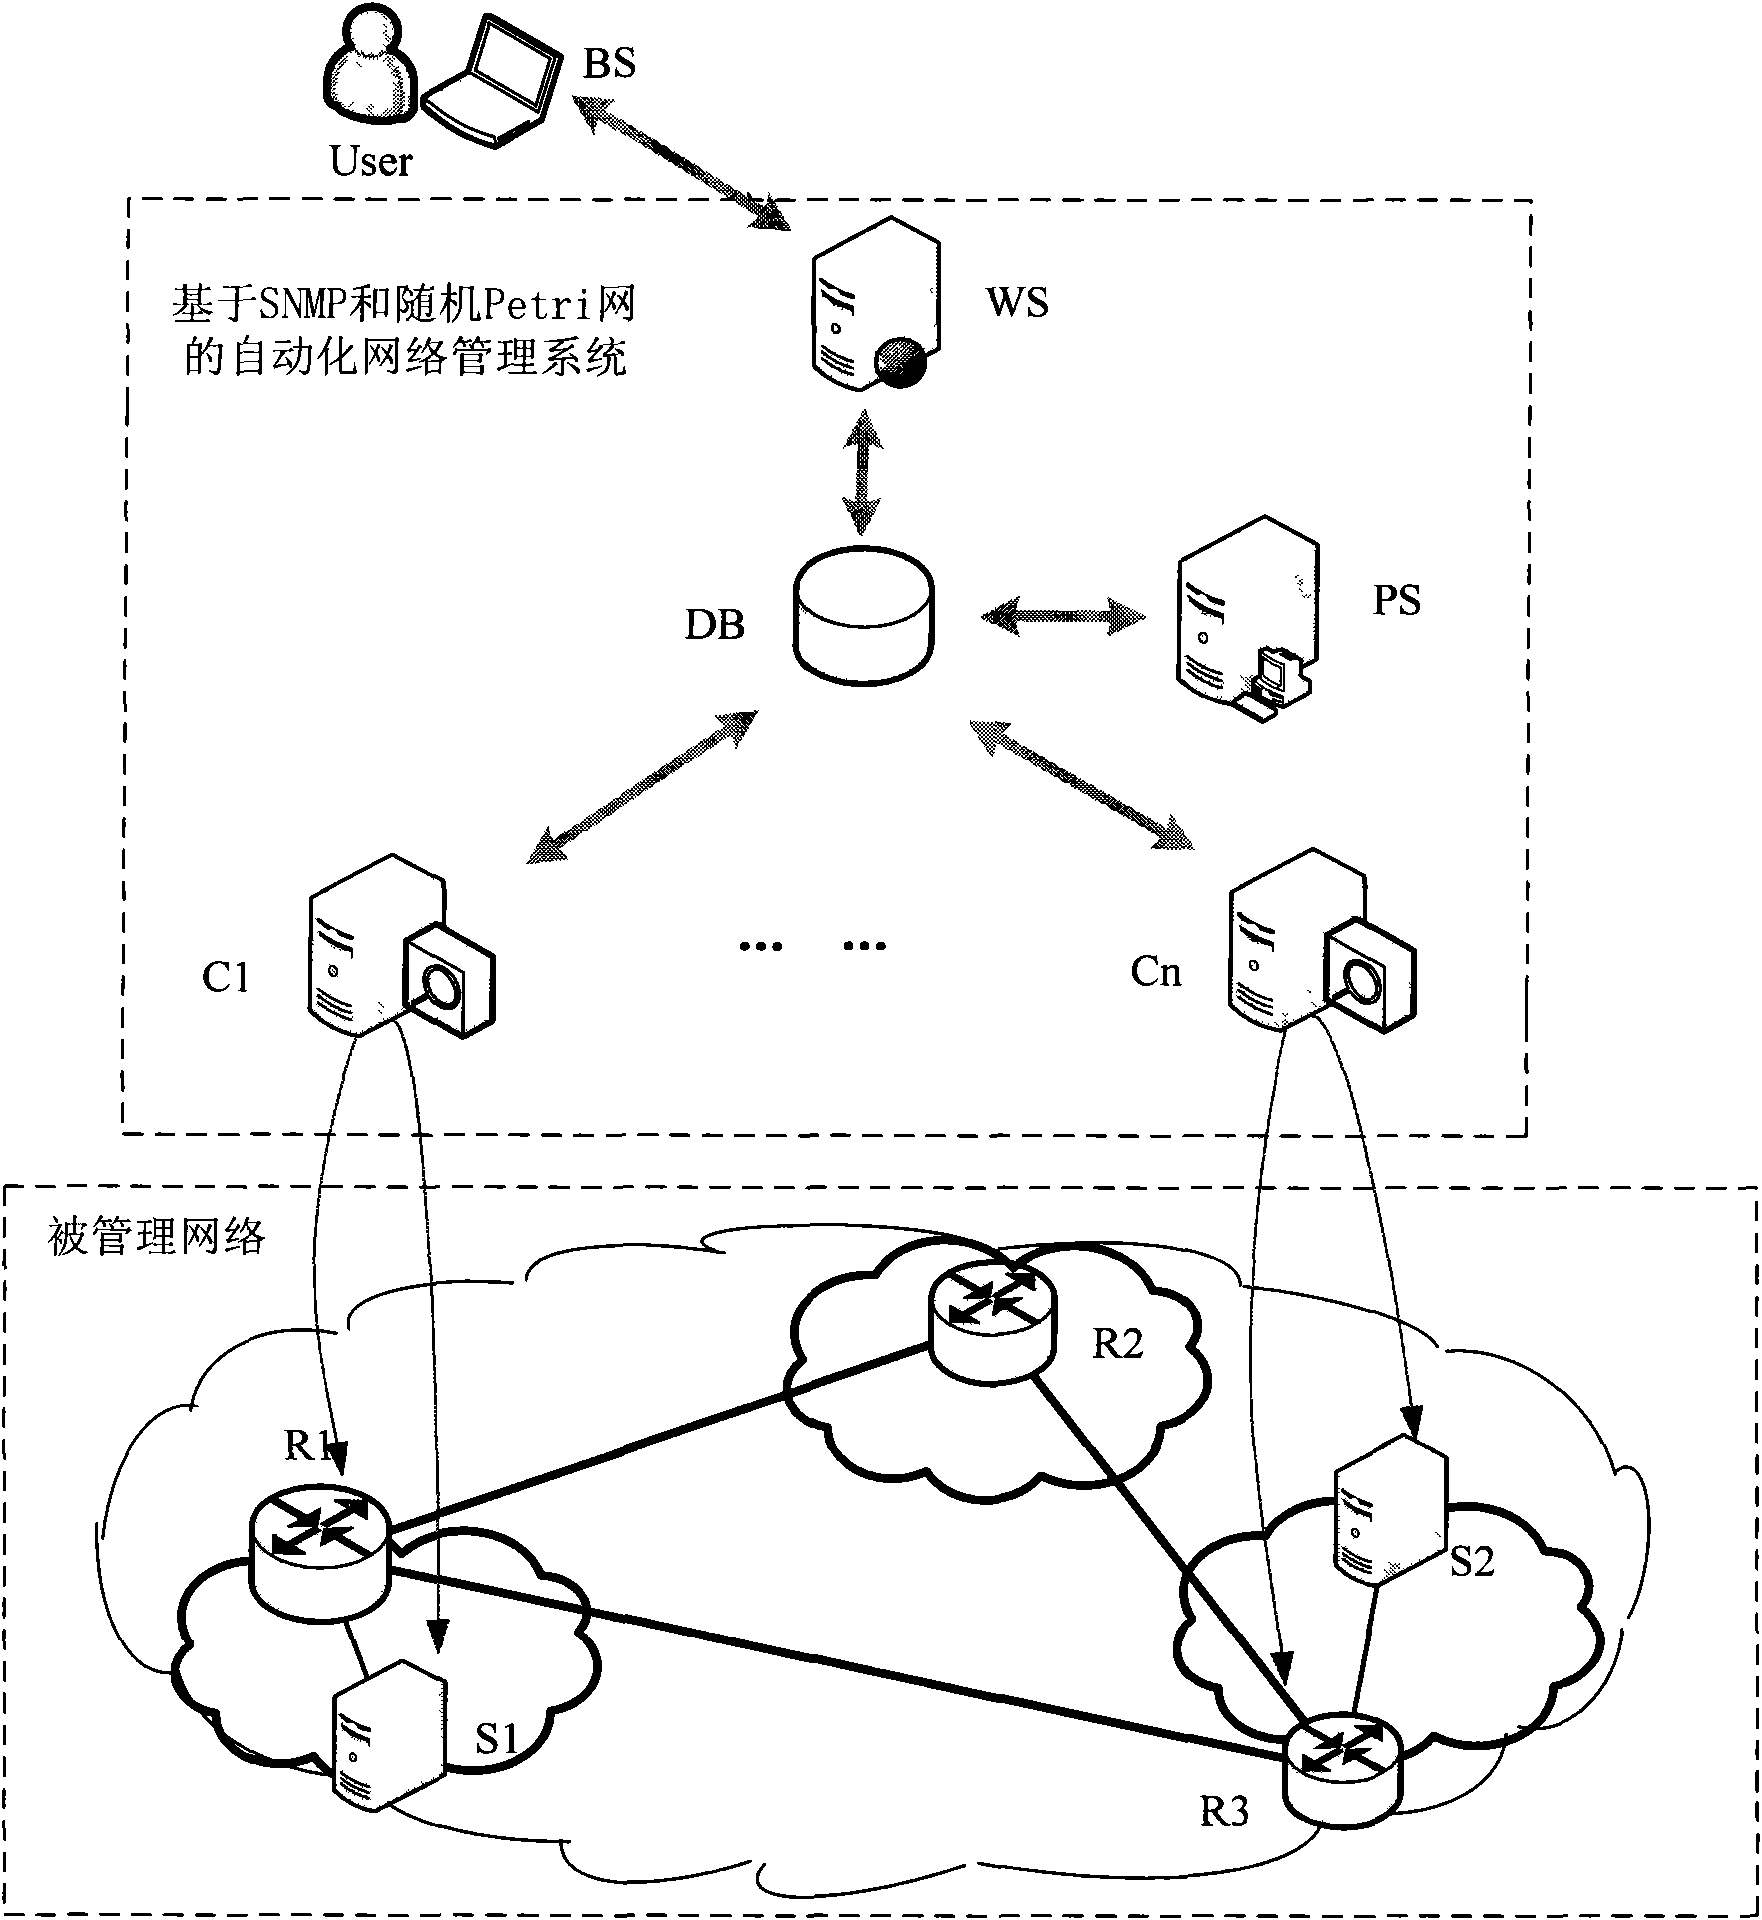 Automatic network management method based on SNMP and stochastic Petri net